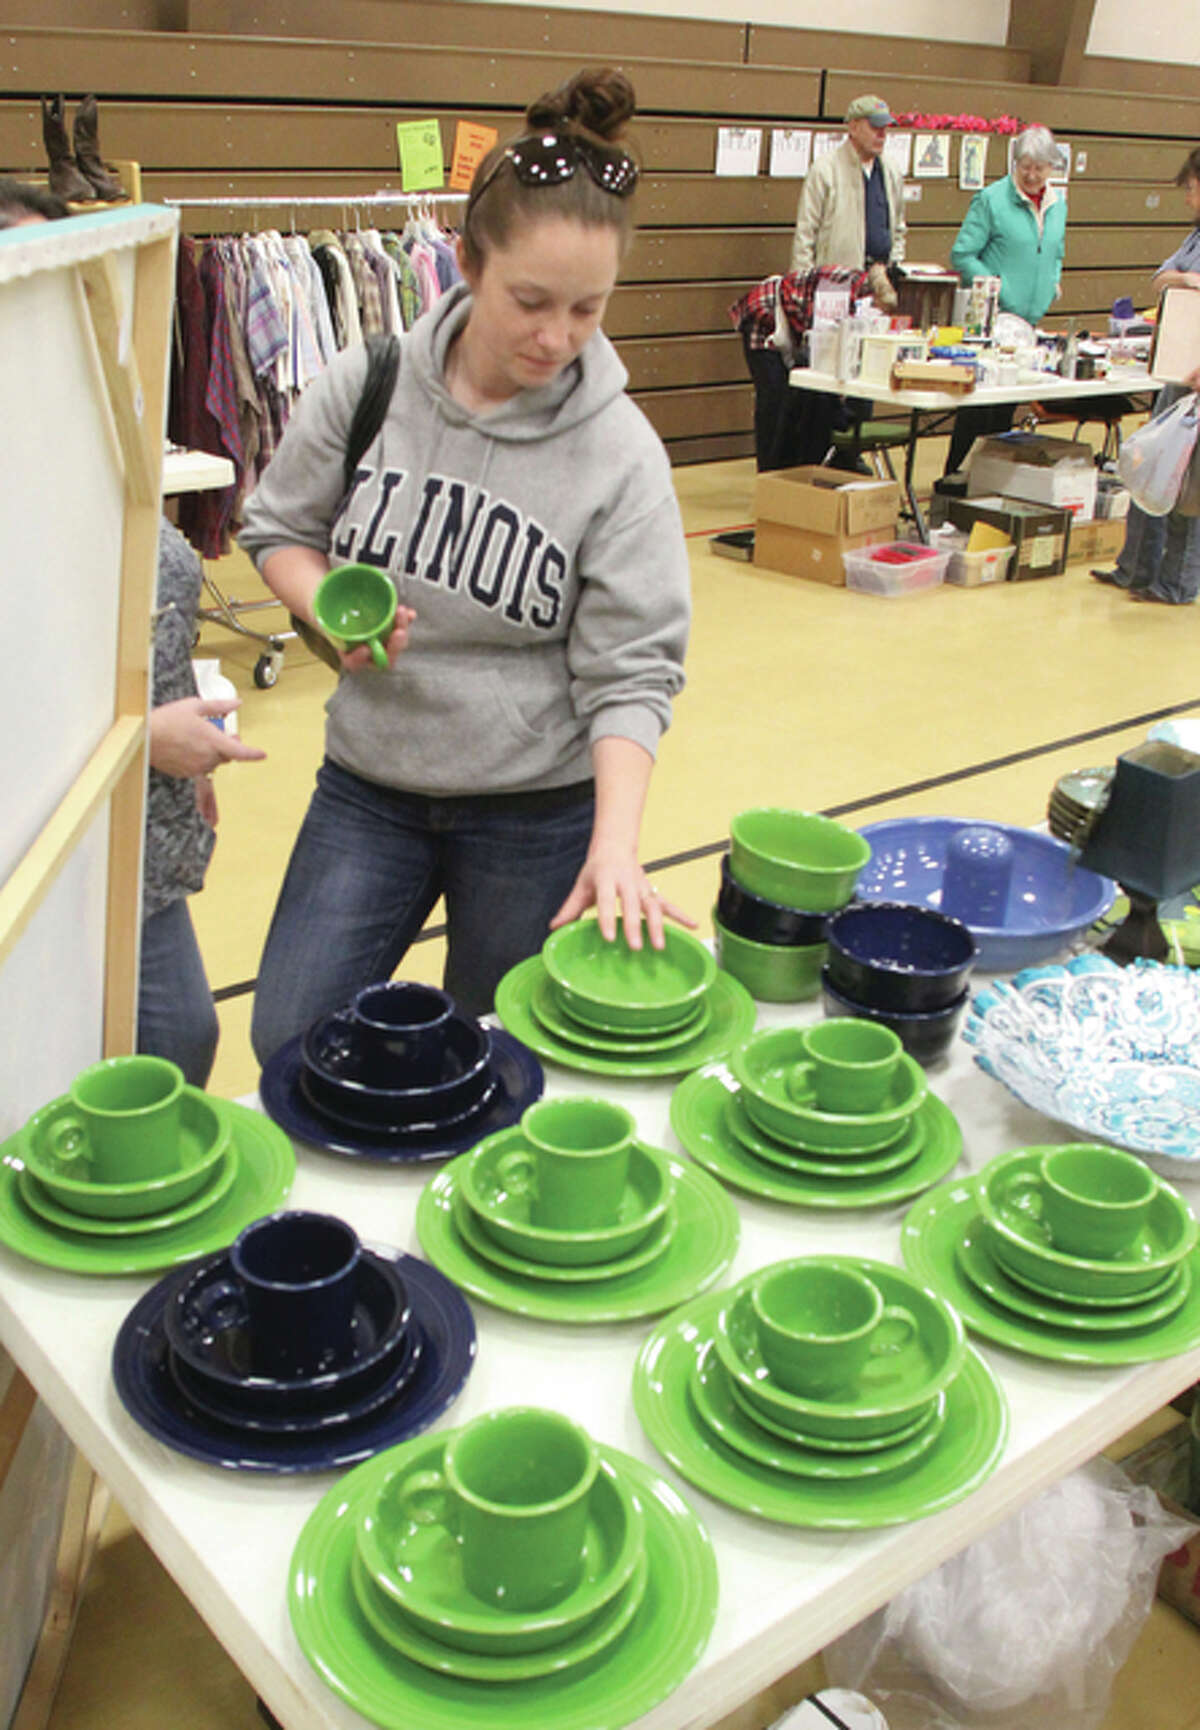 Jerseyville resident Heather Ward looks at dishes at the third Annual Jerseyville Parks and Recreation Department rummage sale, held Saturday. She and her mother Susan Robertson decided to drop by while out grocery shopping.